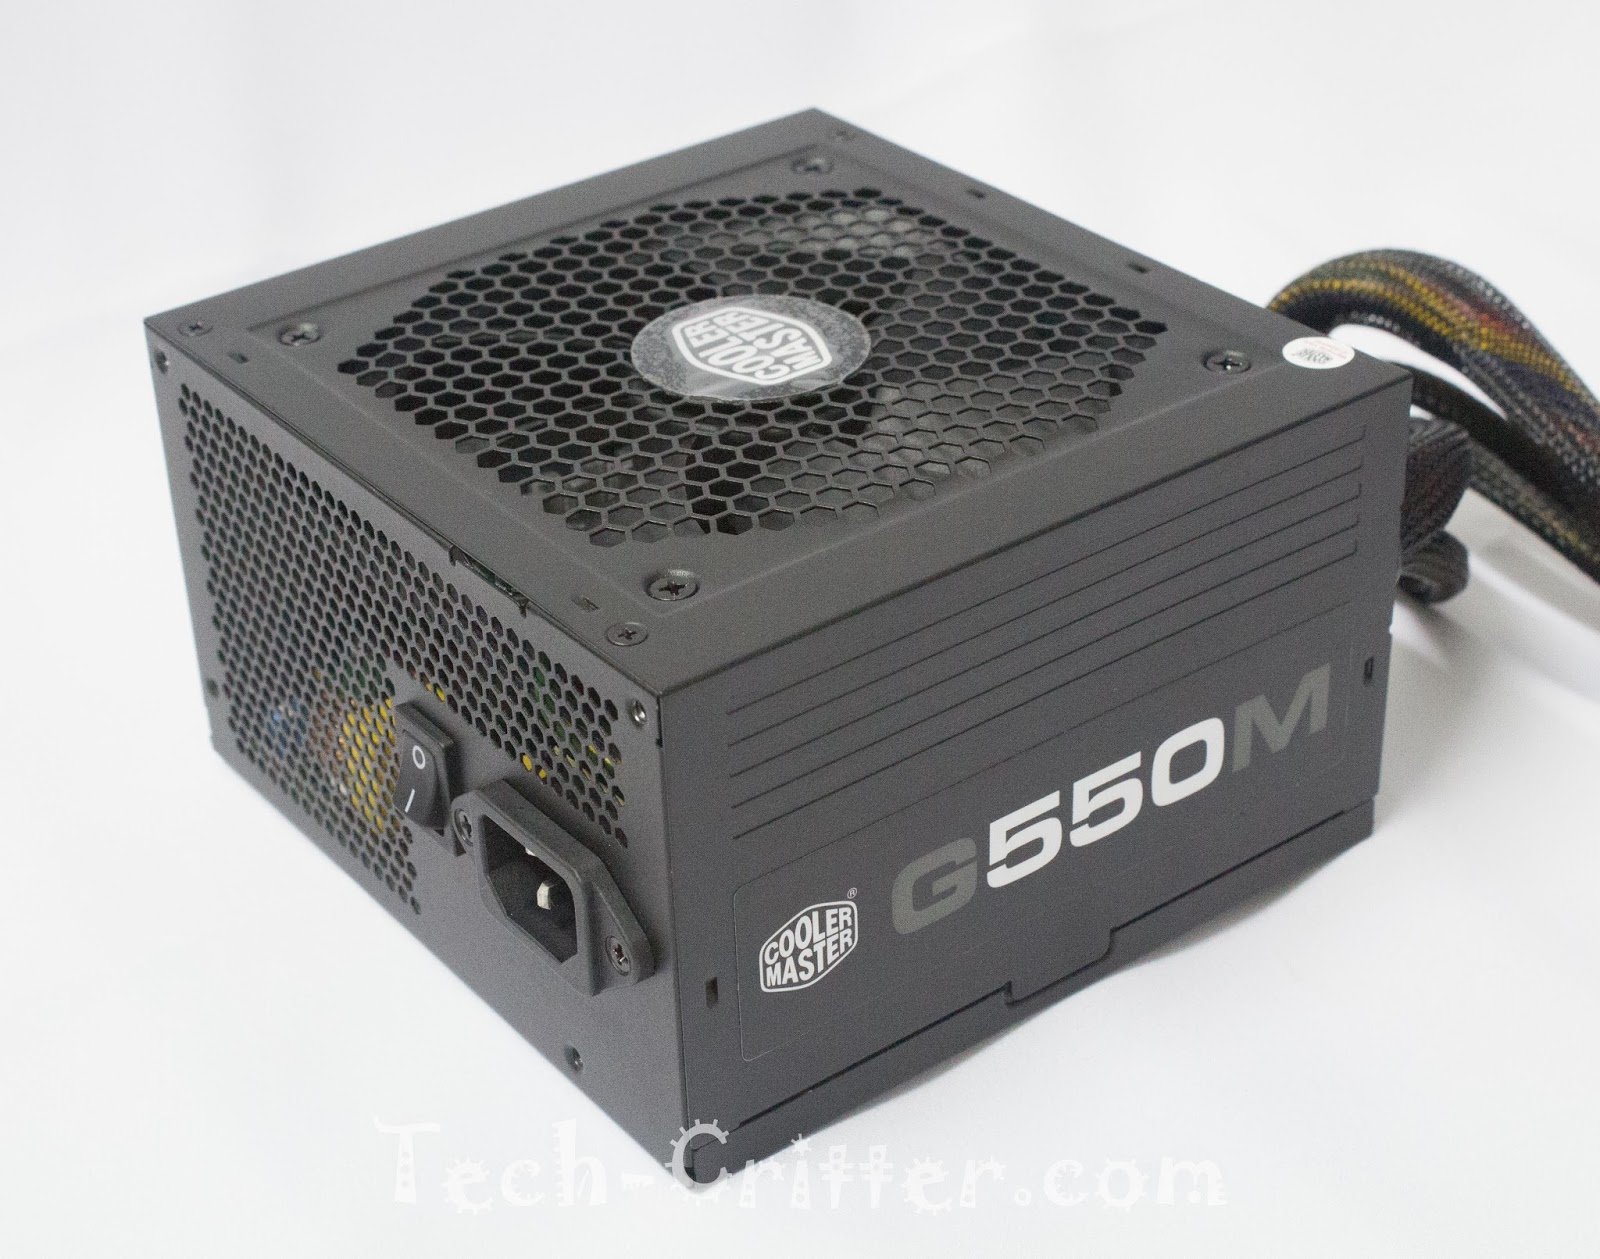 Cooler Master G550M Power Supply Unit Unboxing and Overview 29